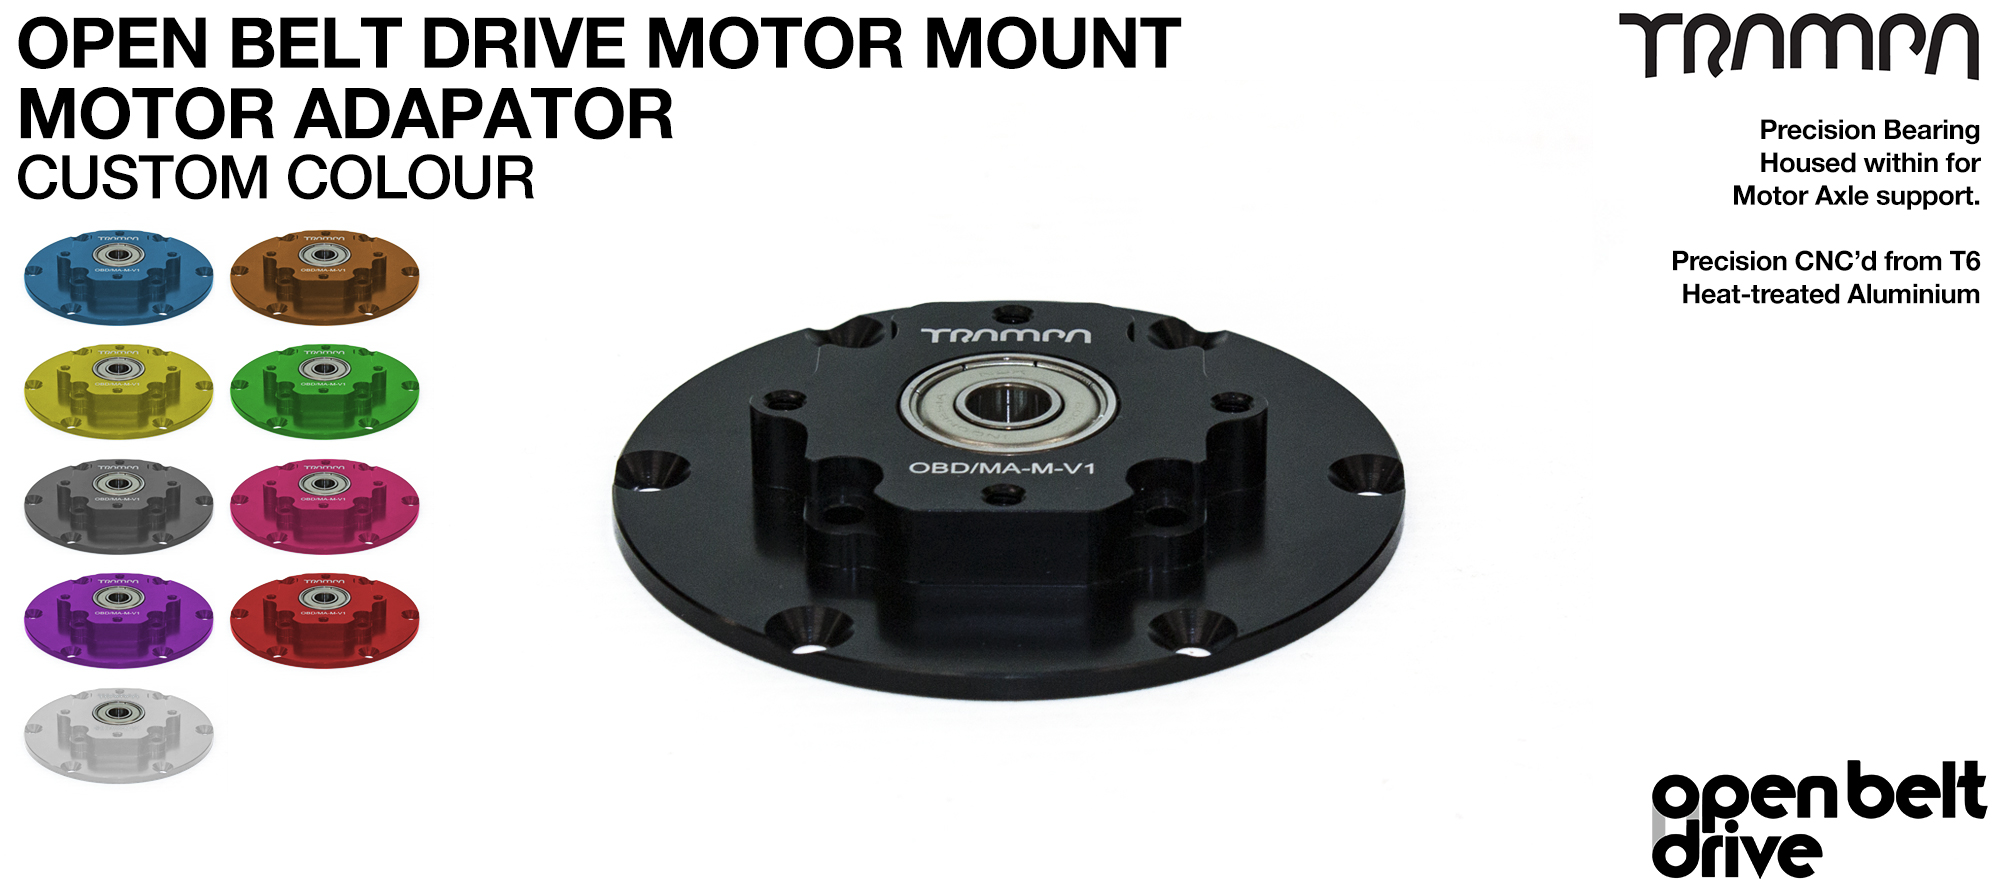 Open Belt Drive Motor Adaptor with Housed Bearing Connects with Both the 66 & the 76 Tooth Motor Mounts